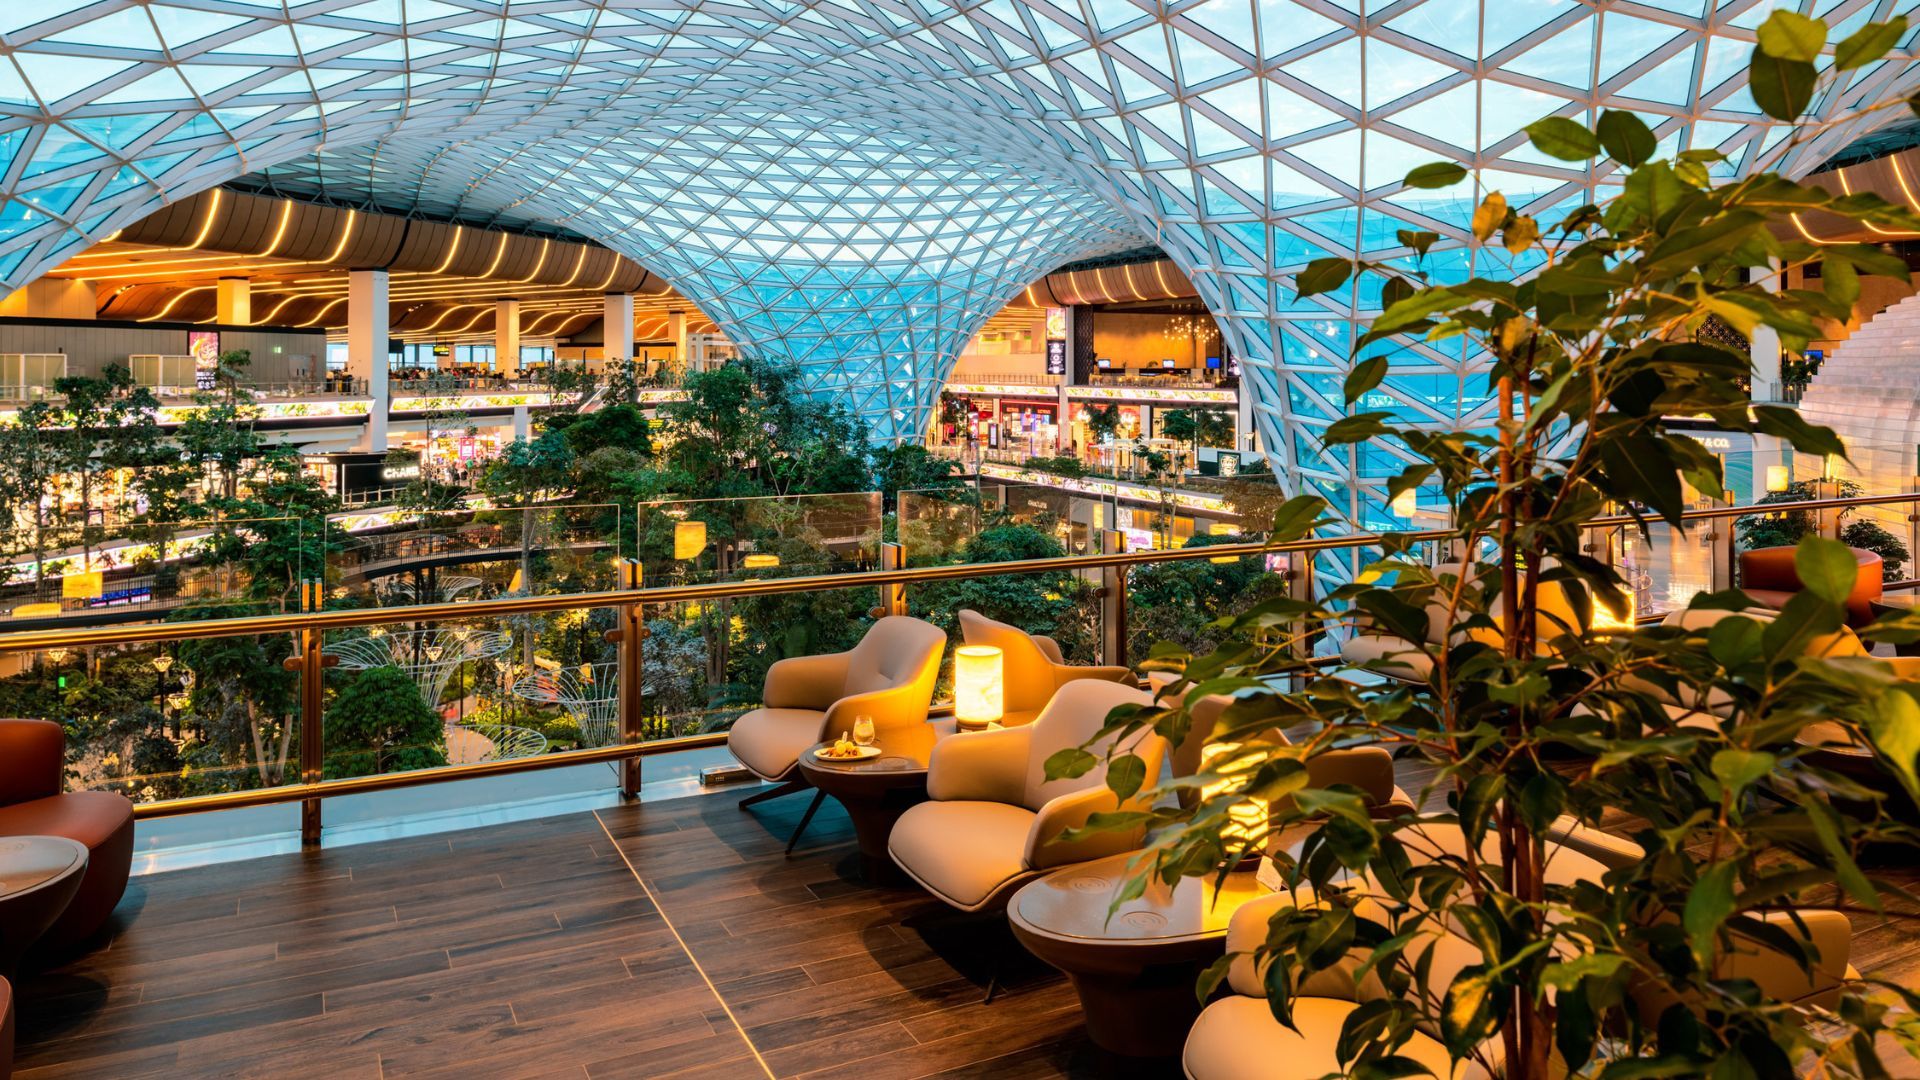 Louis Vuitton spreads a little luxury at Doha Airport: Travel Weekly Asia